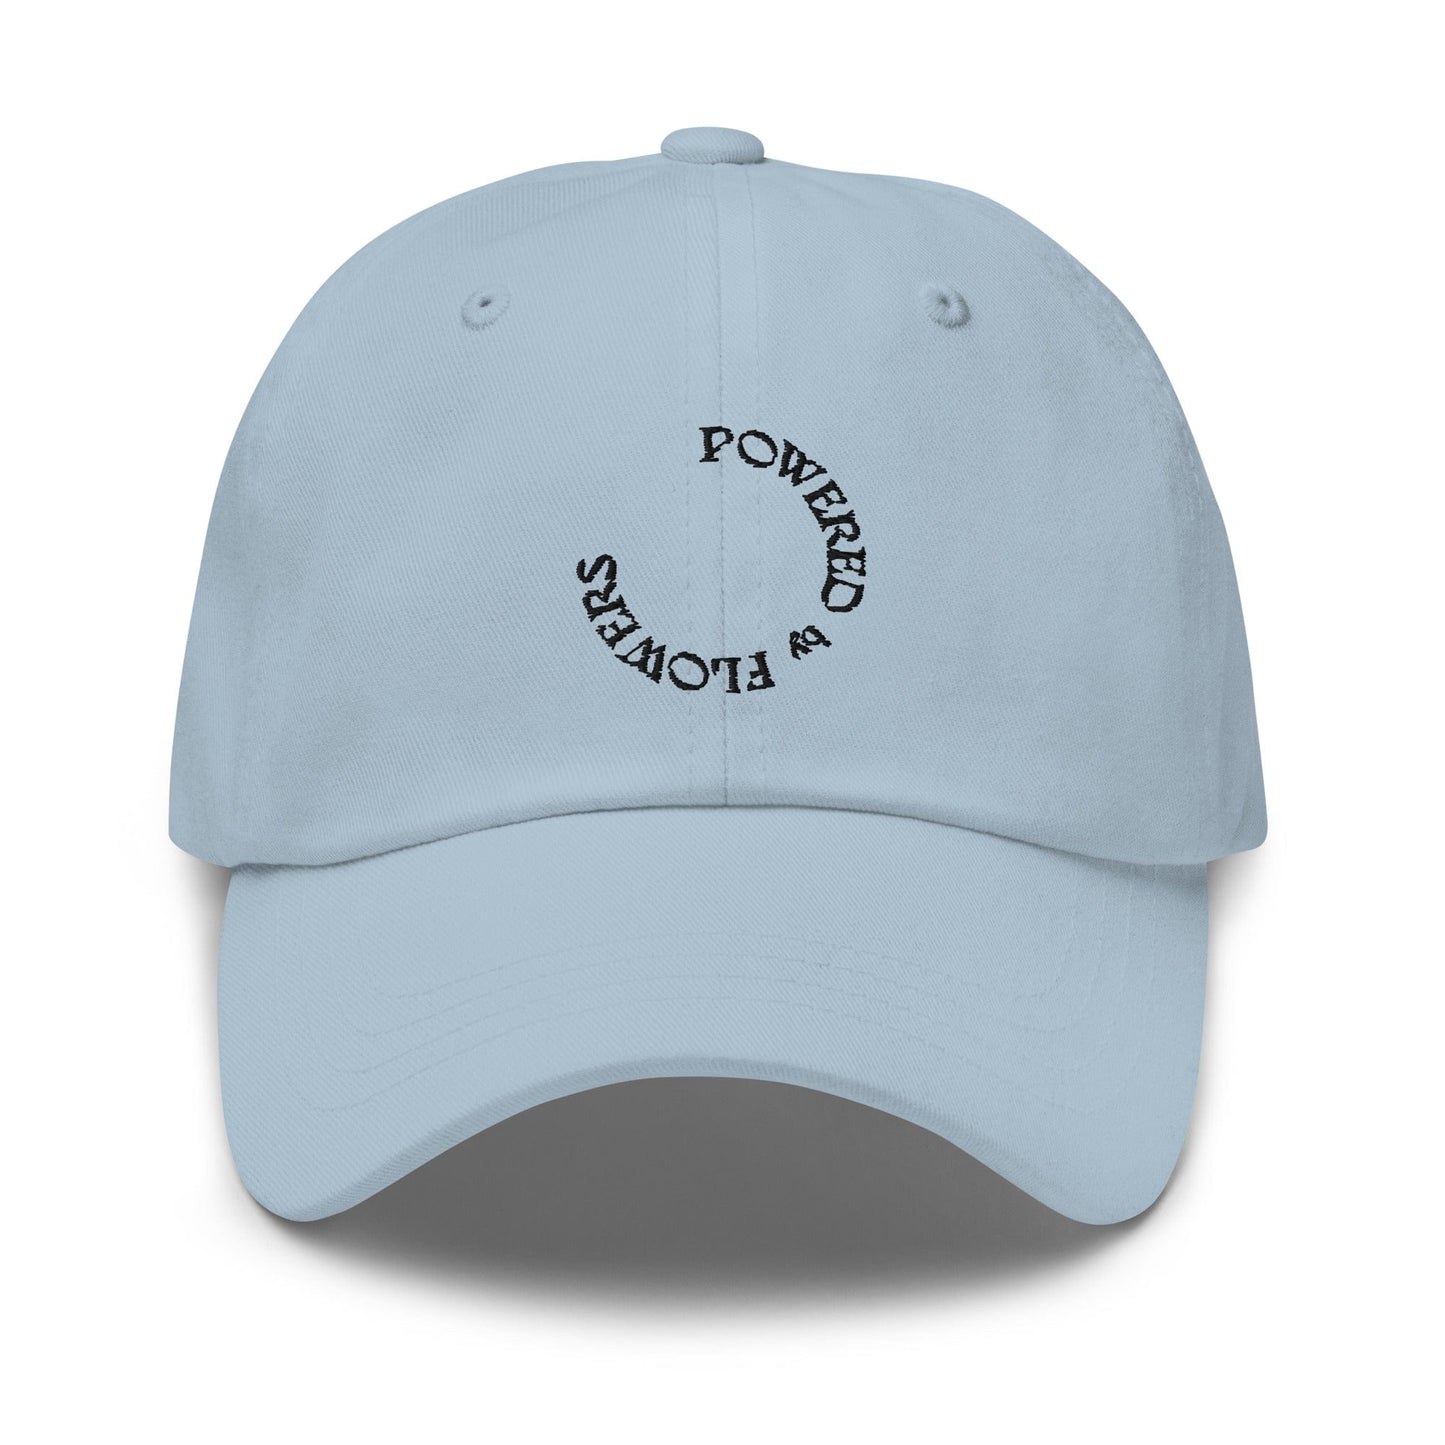 Powered by Flowers Hat - Black Lettering